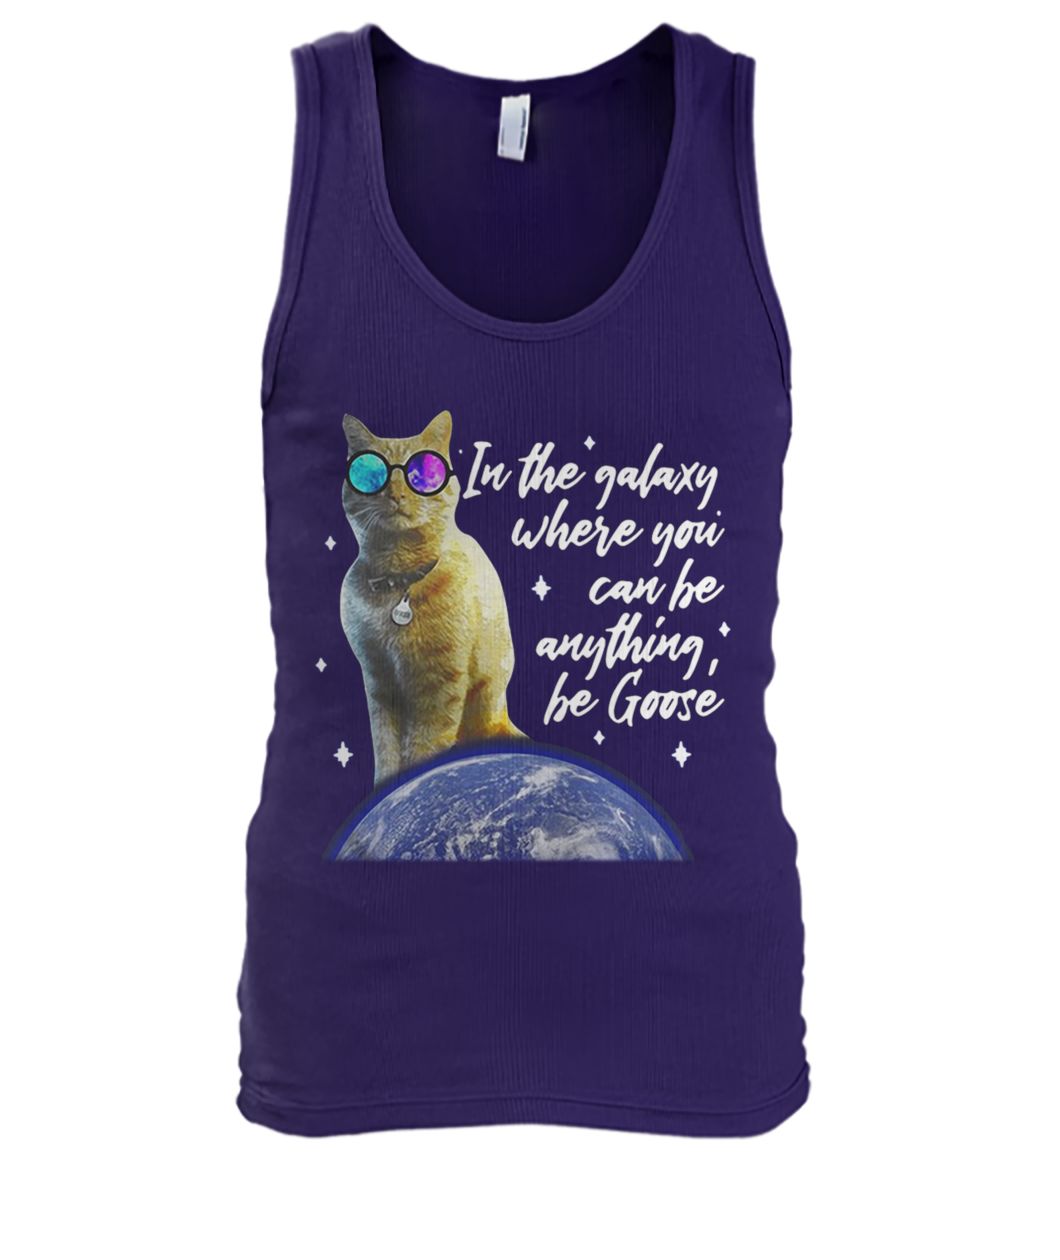 Captain marvel goose the cat in a galaxy where you can be anything be goose men's tank top